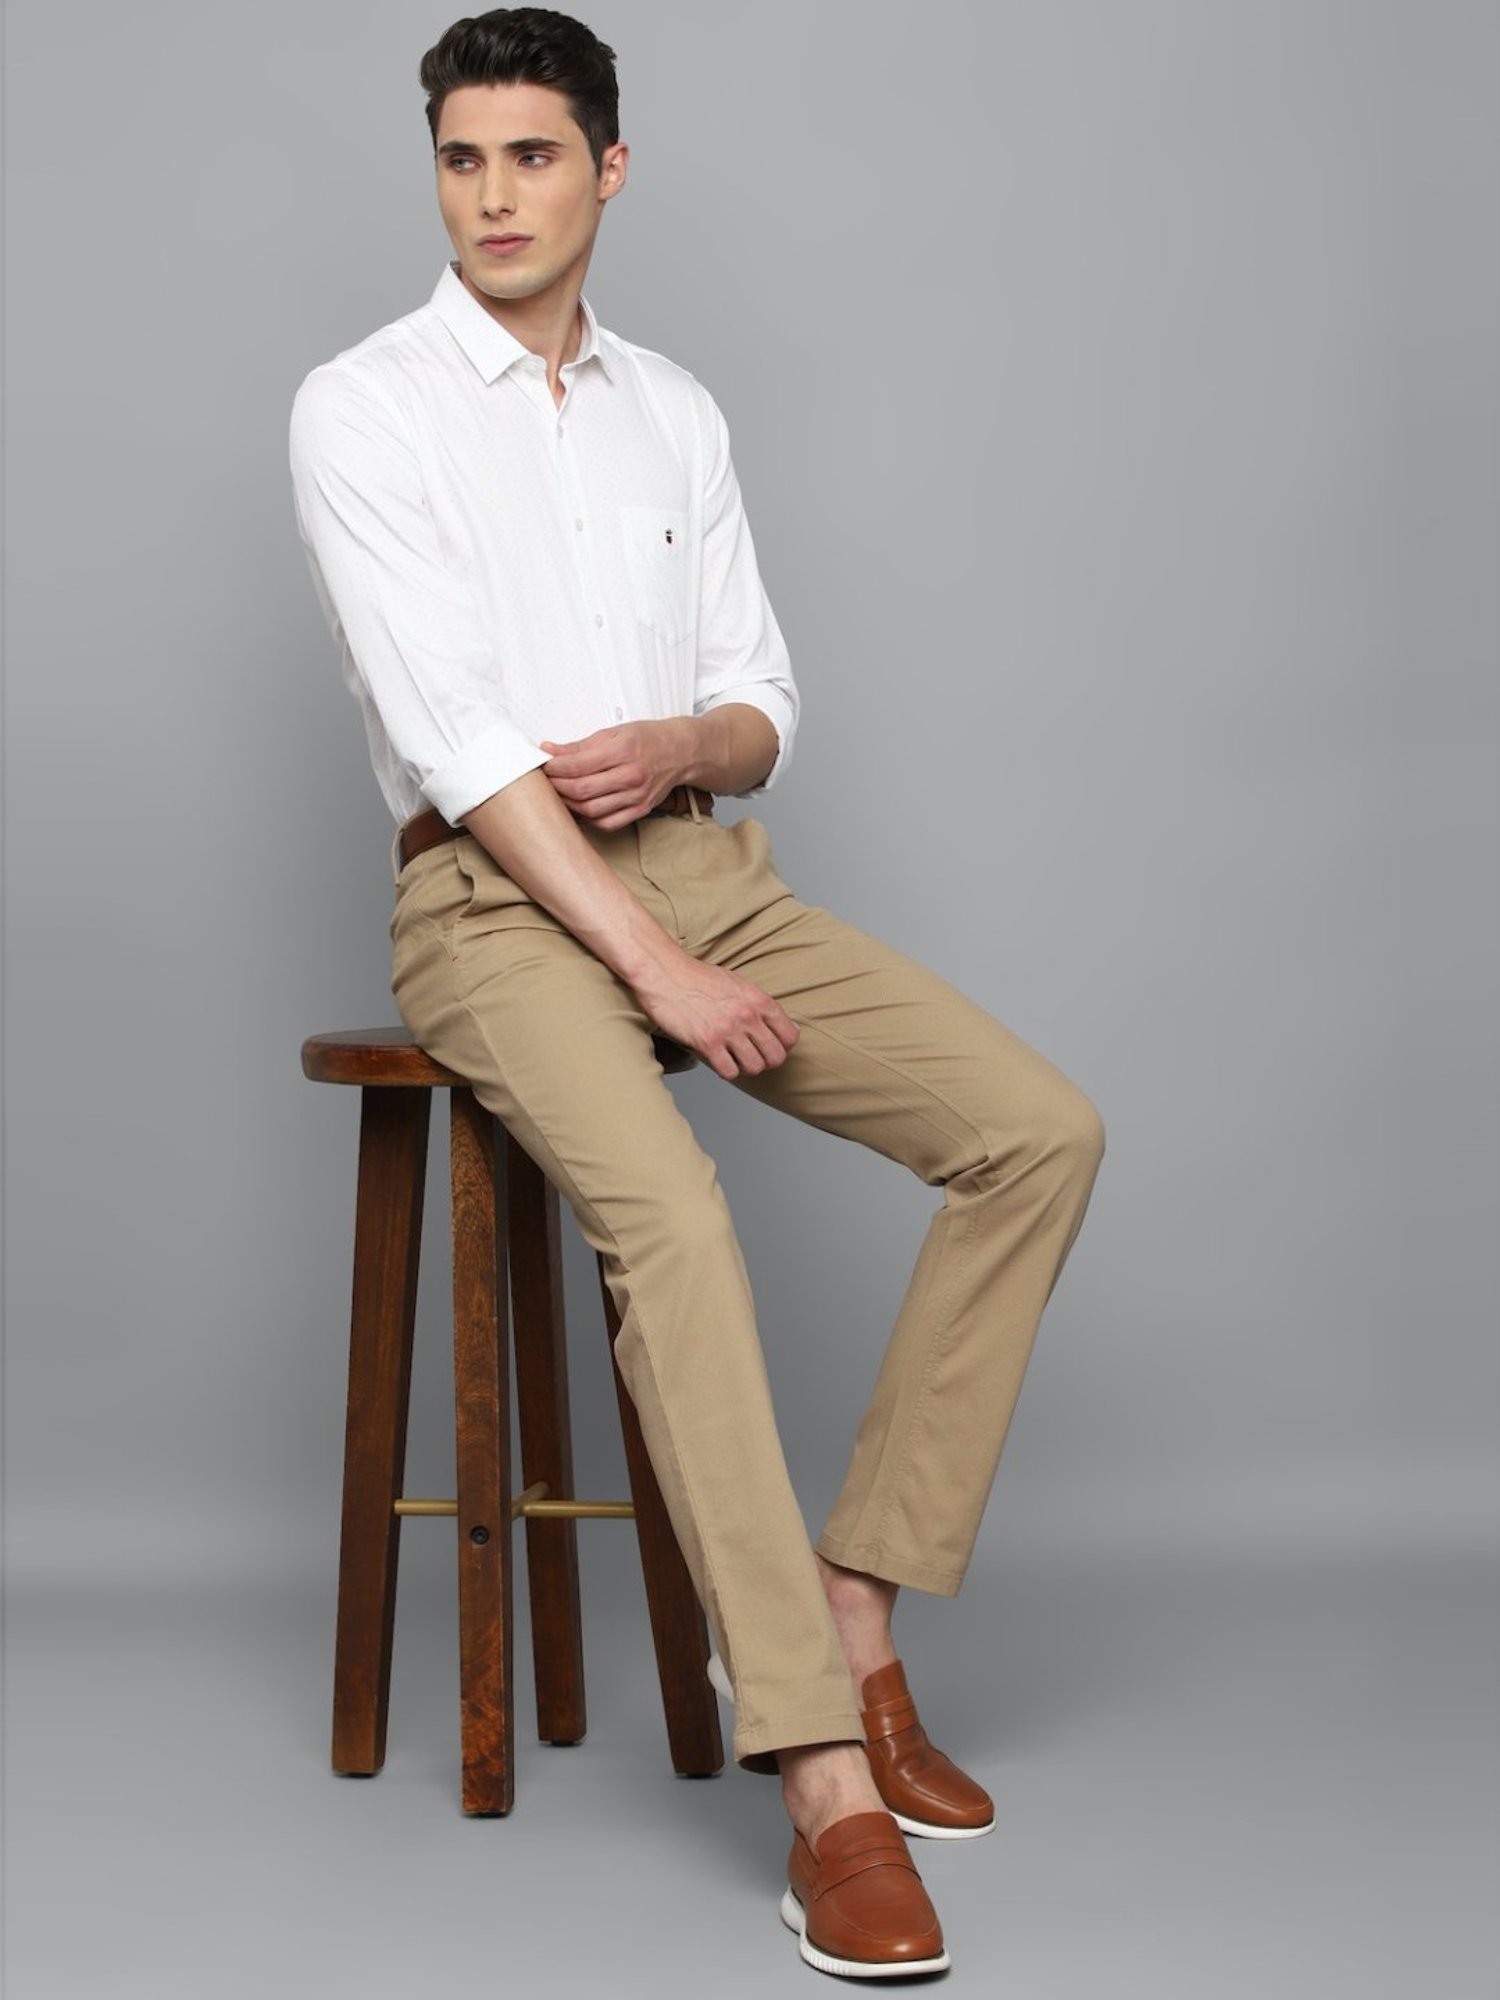 Louis Philippe Sport HOLIDAY Slim Fit Men Khaki Trousers - Buy Louis  Philippe Sport HOLIDAY Slim Fit Men Khaki Trousers Online at Best Prices in  India